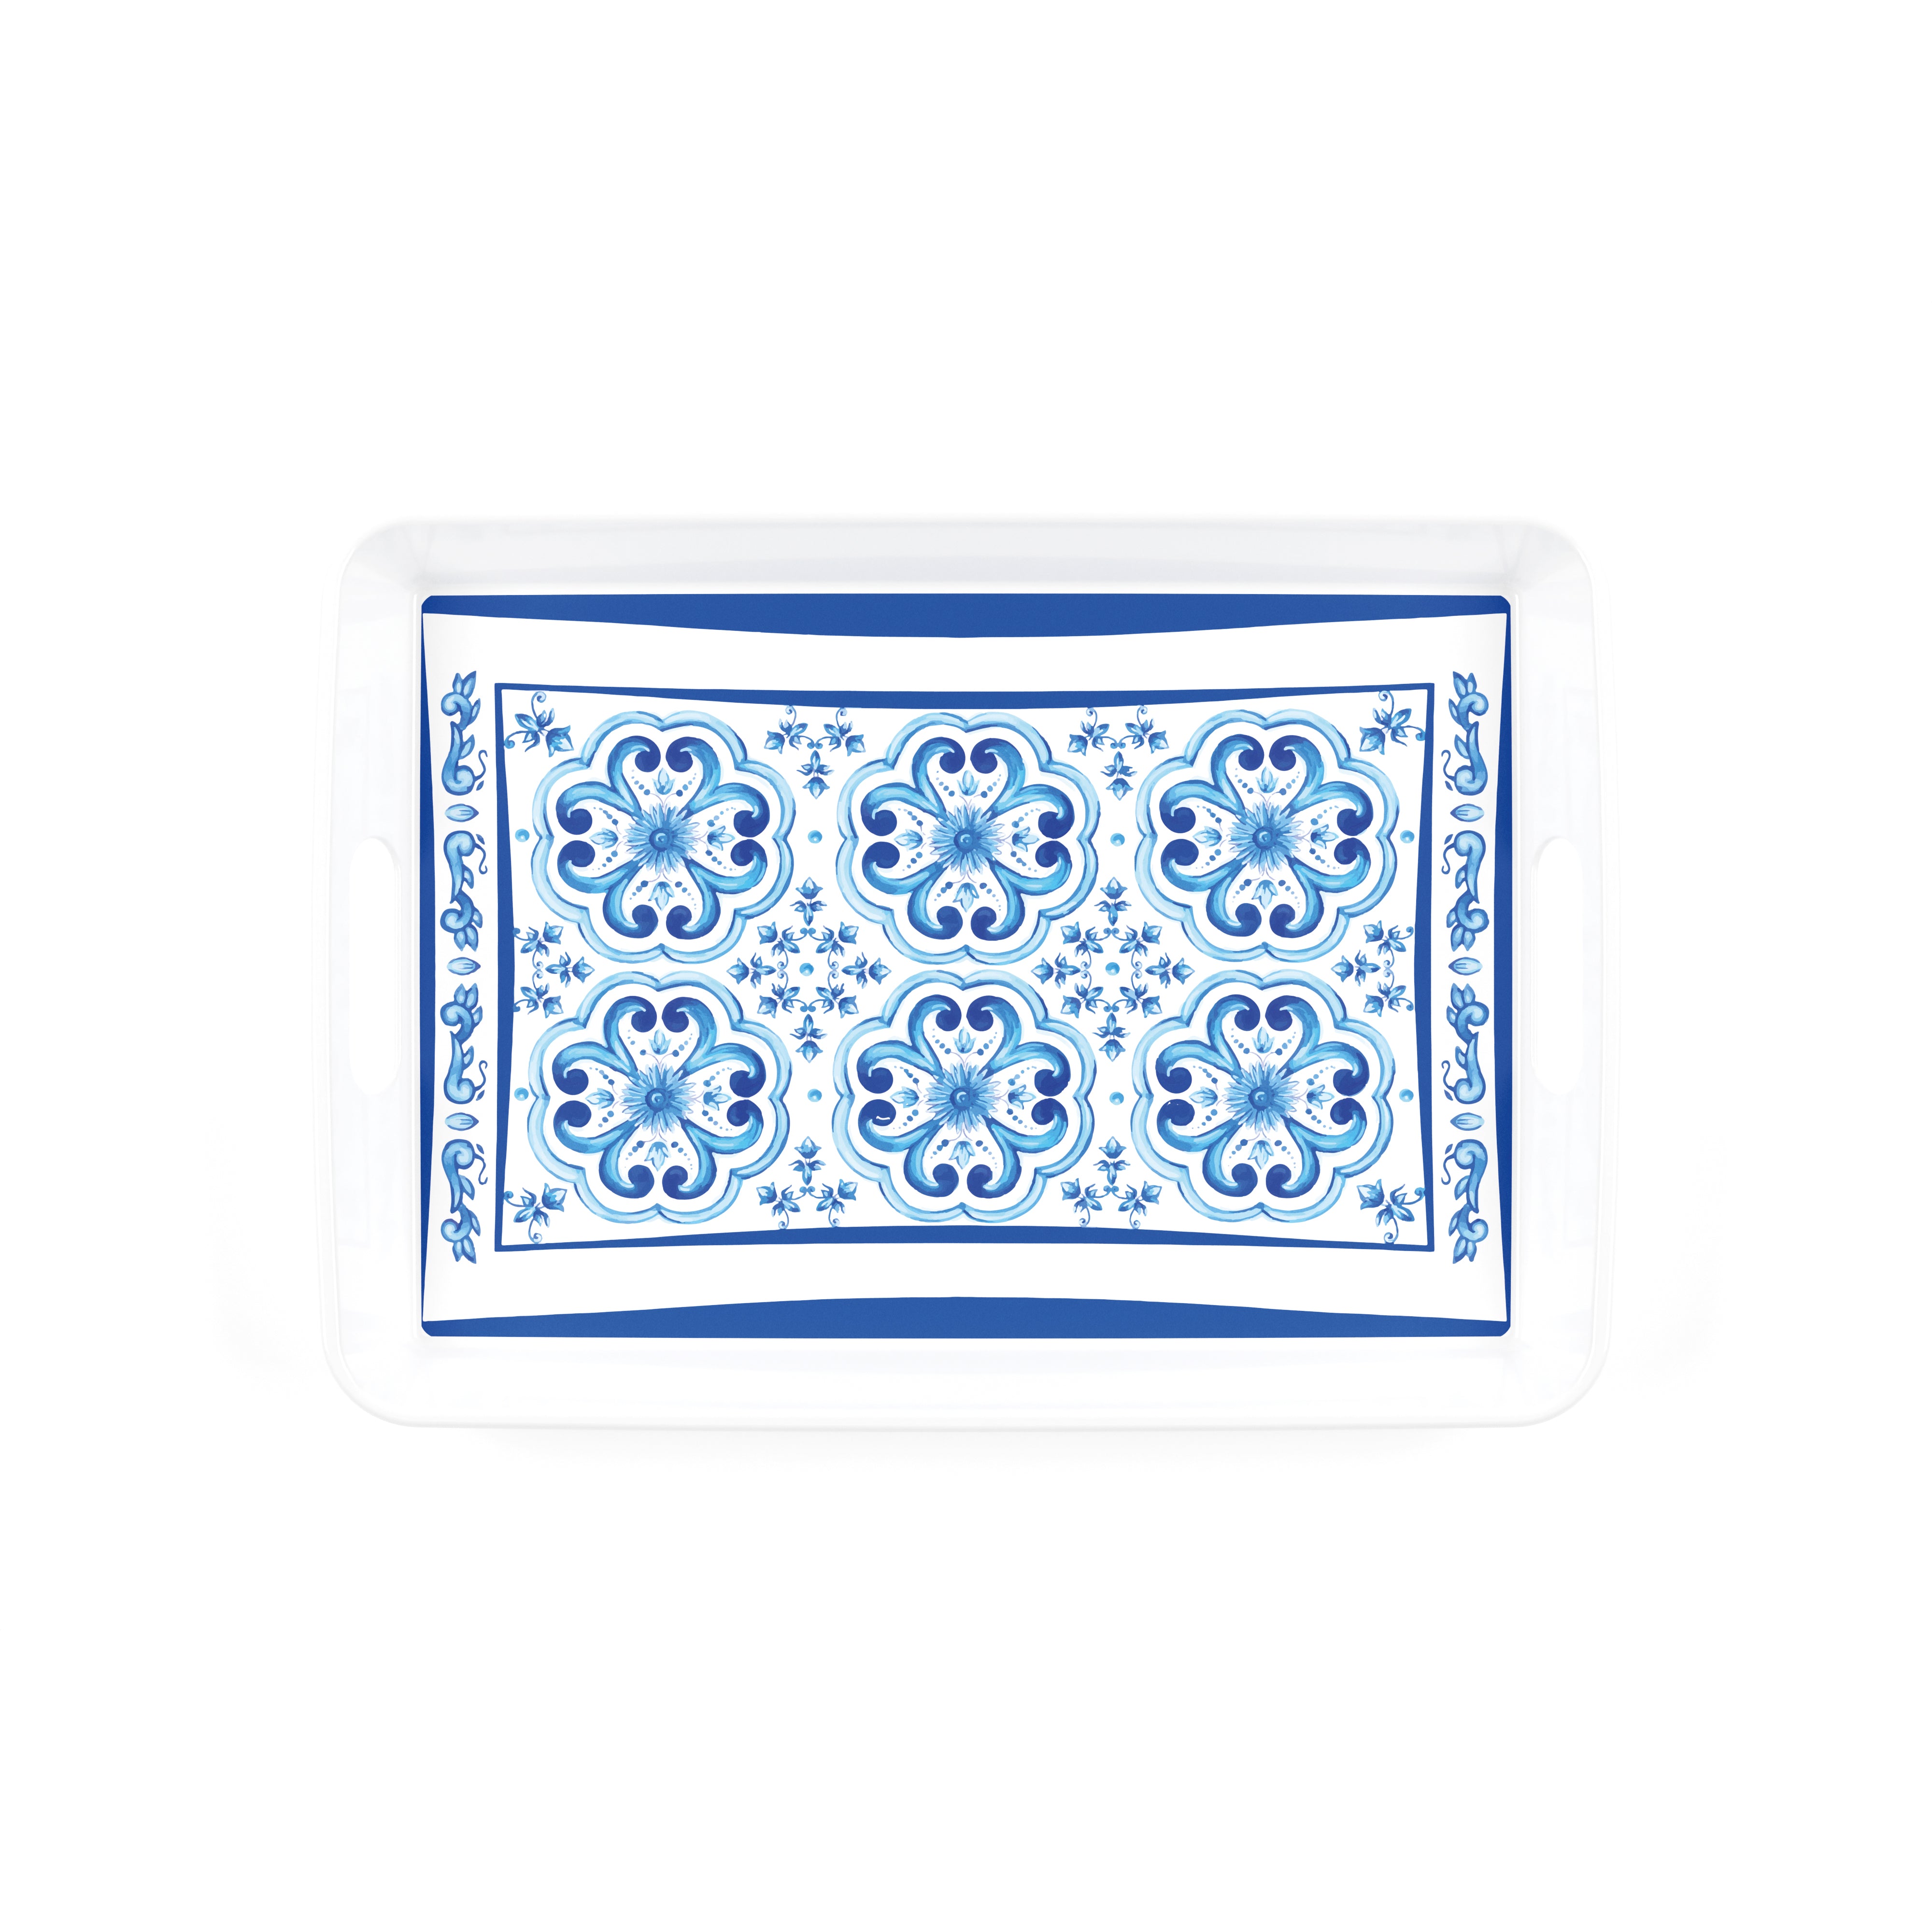 RECTANGULAR TRAY WITH HANDLES "BLUES"